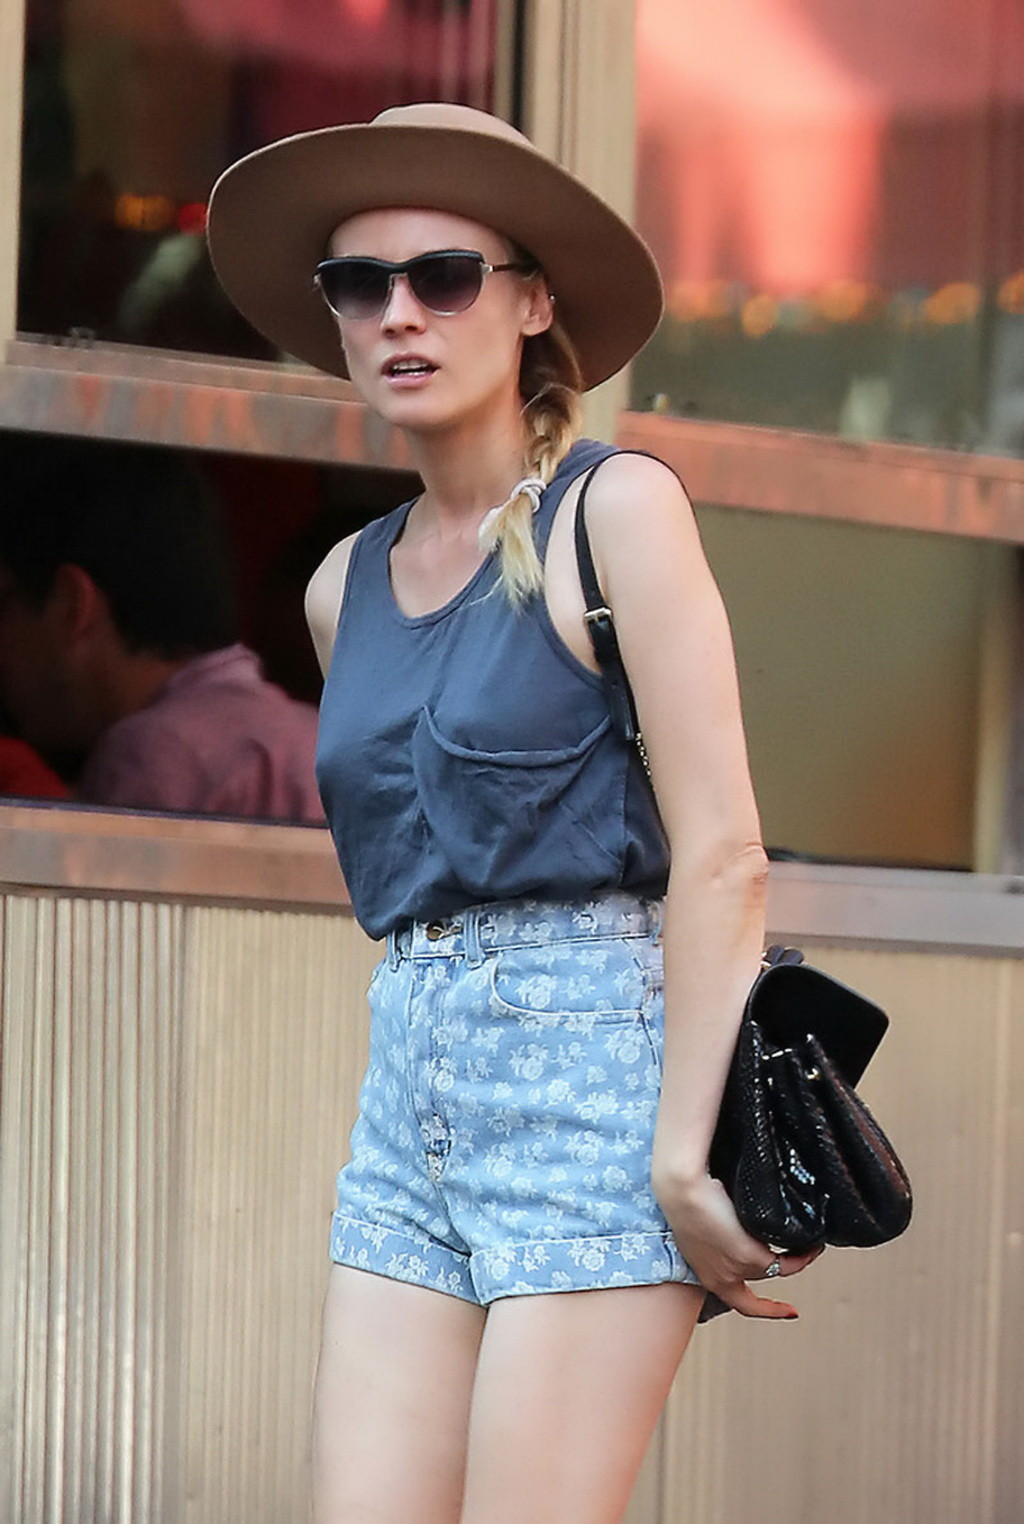 Diane Kruger leggy and showing slight pokies in denim shorts and skimpy top out  #75252901